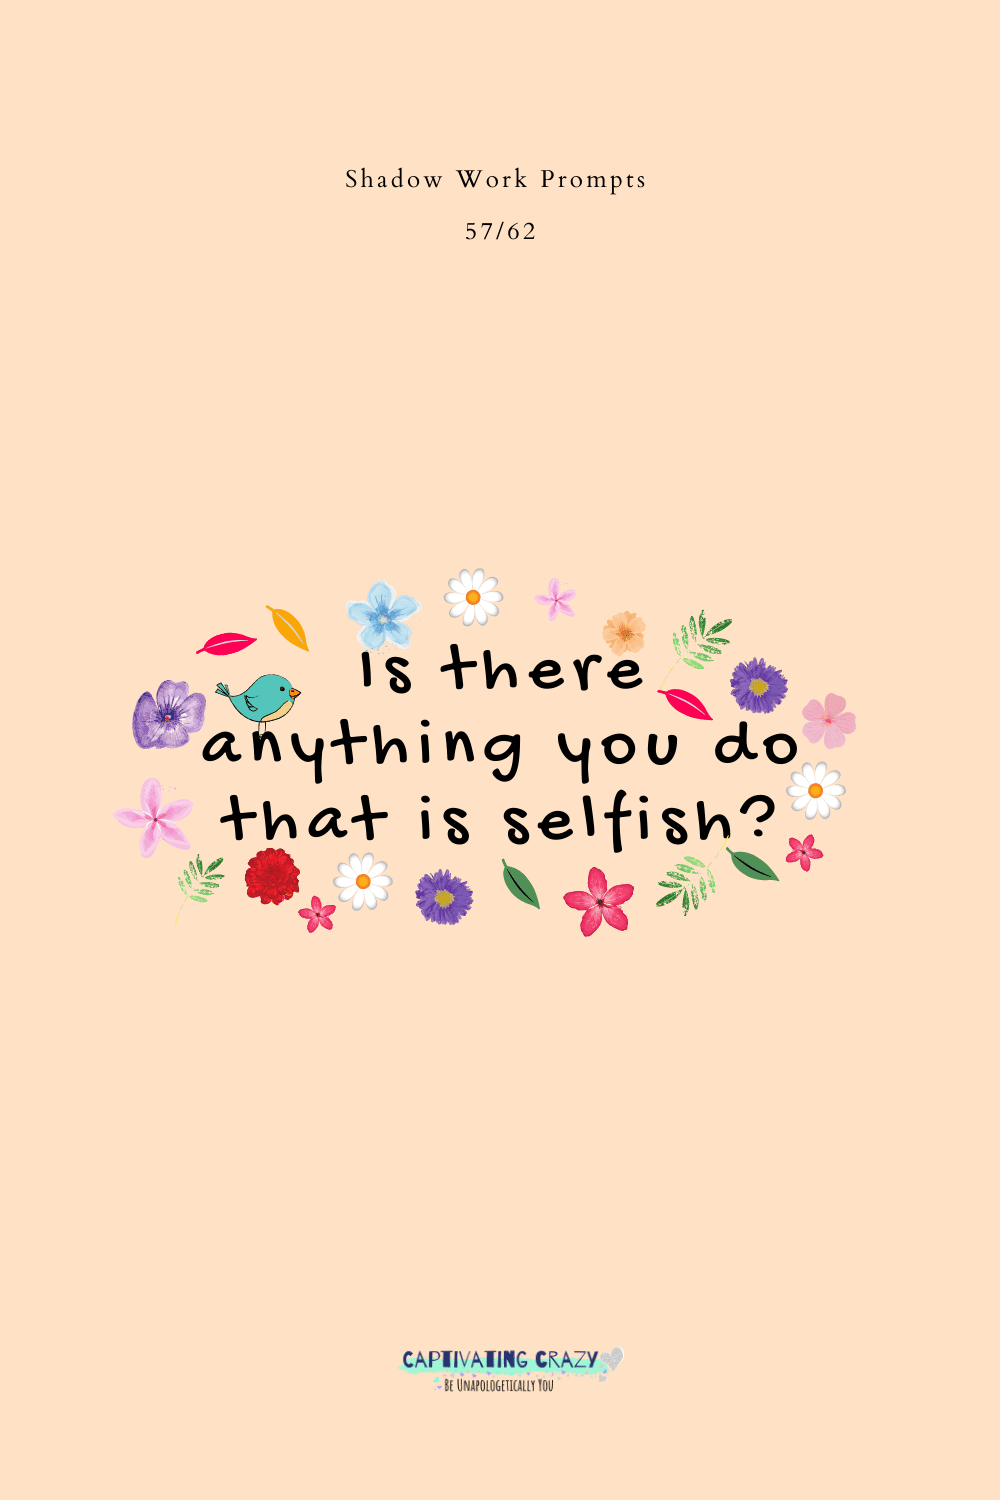 Is there anything you do that is selfish?